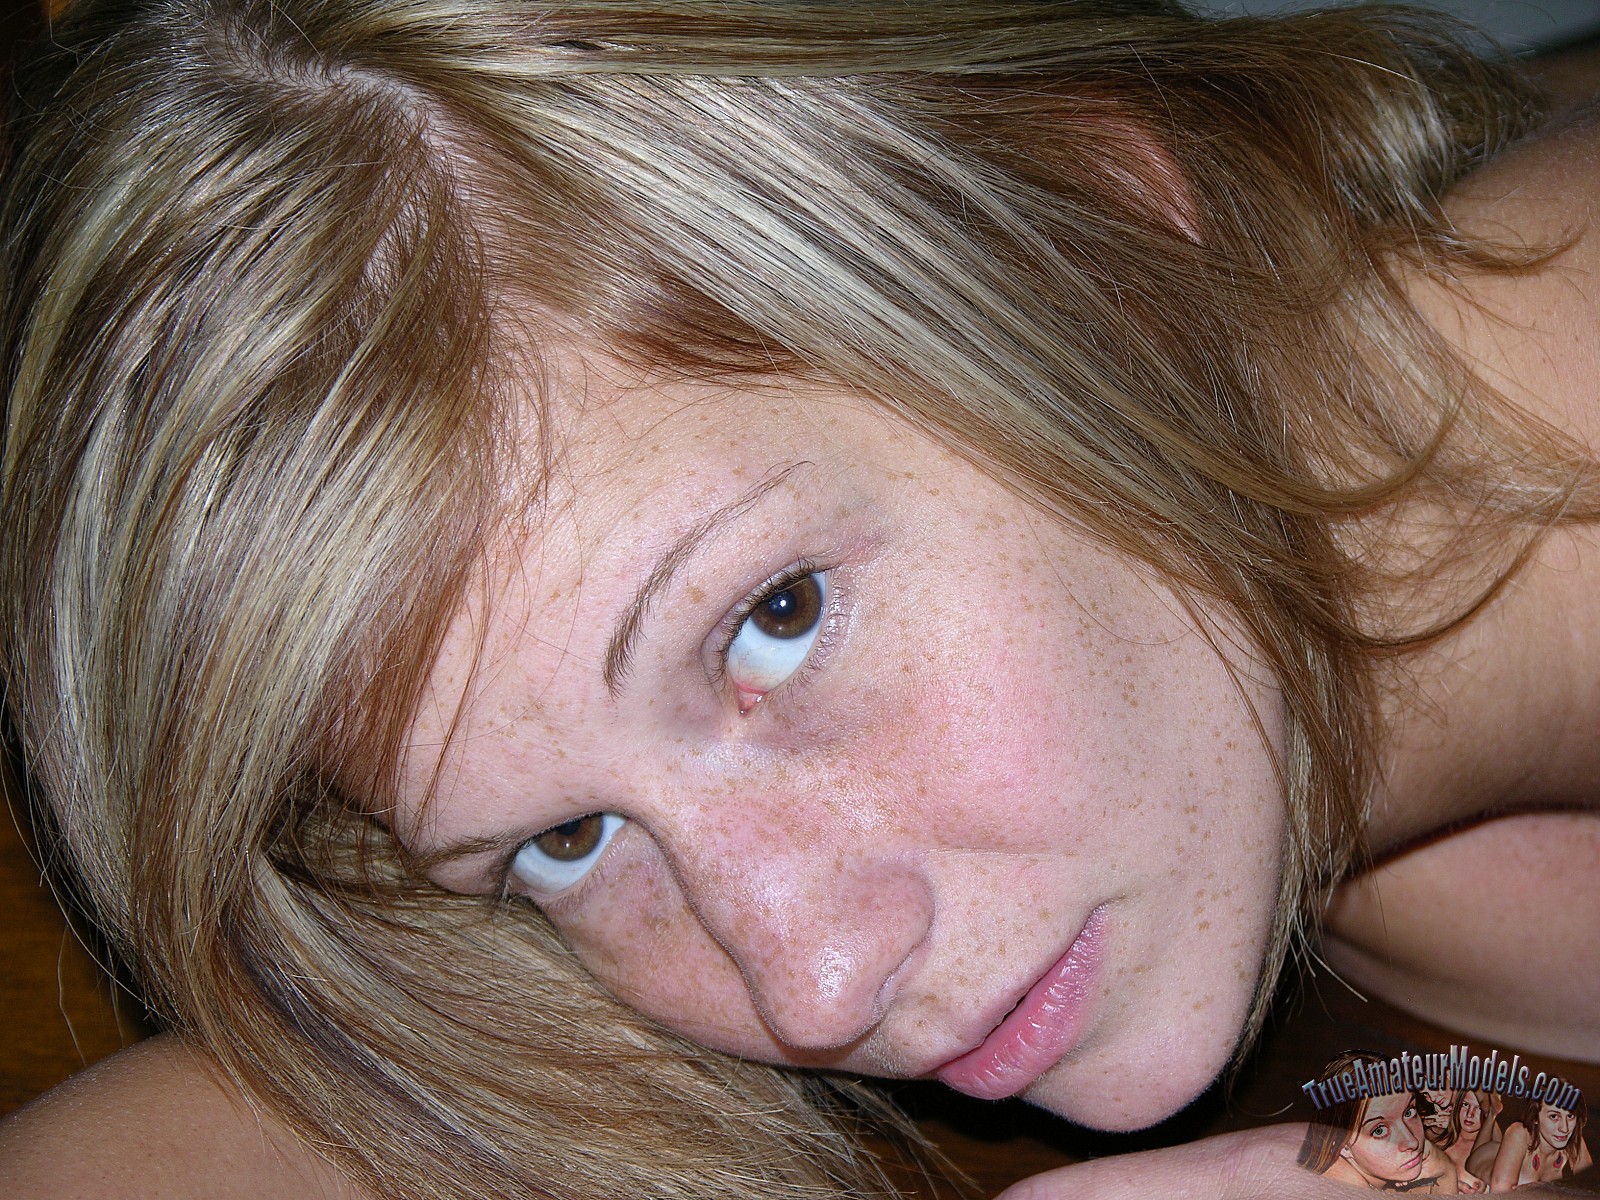 Freckles / Girls with Freckles Page 16 Freeones Forum photo photo picture